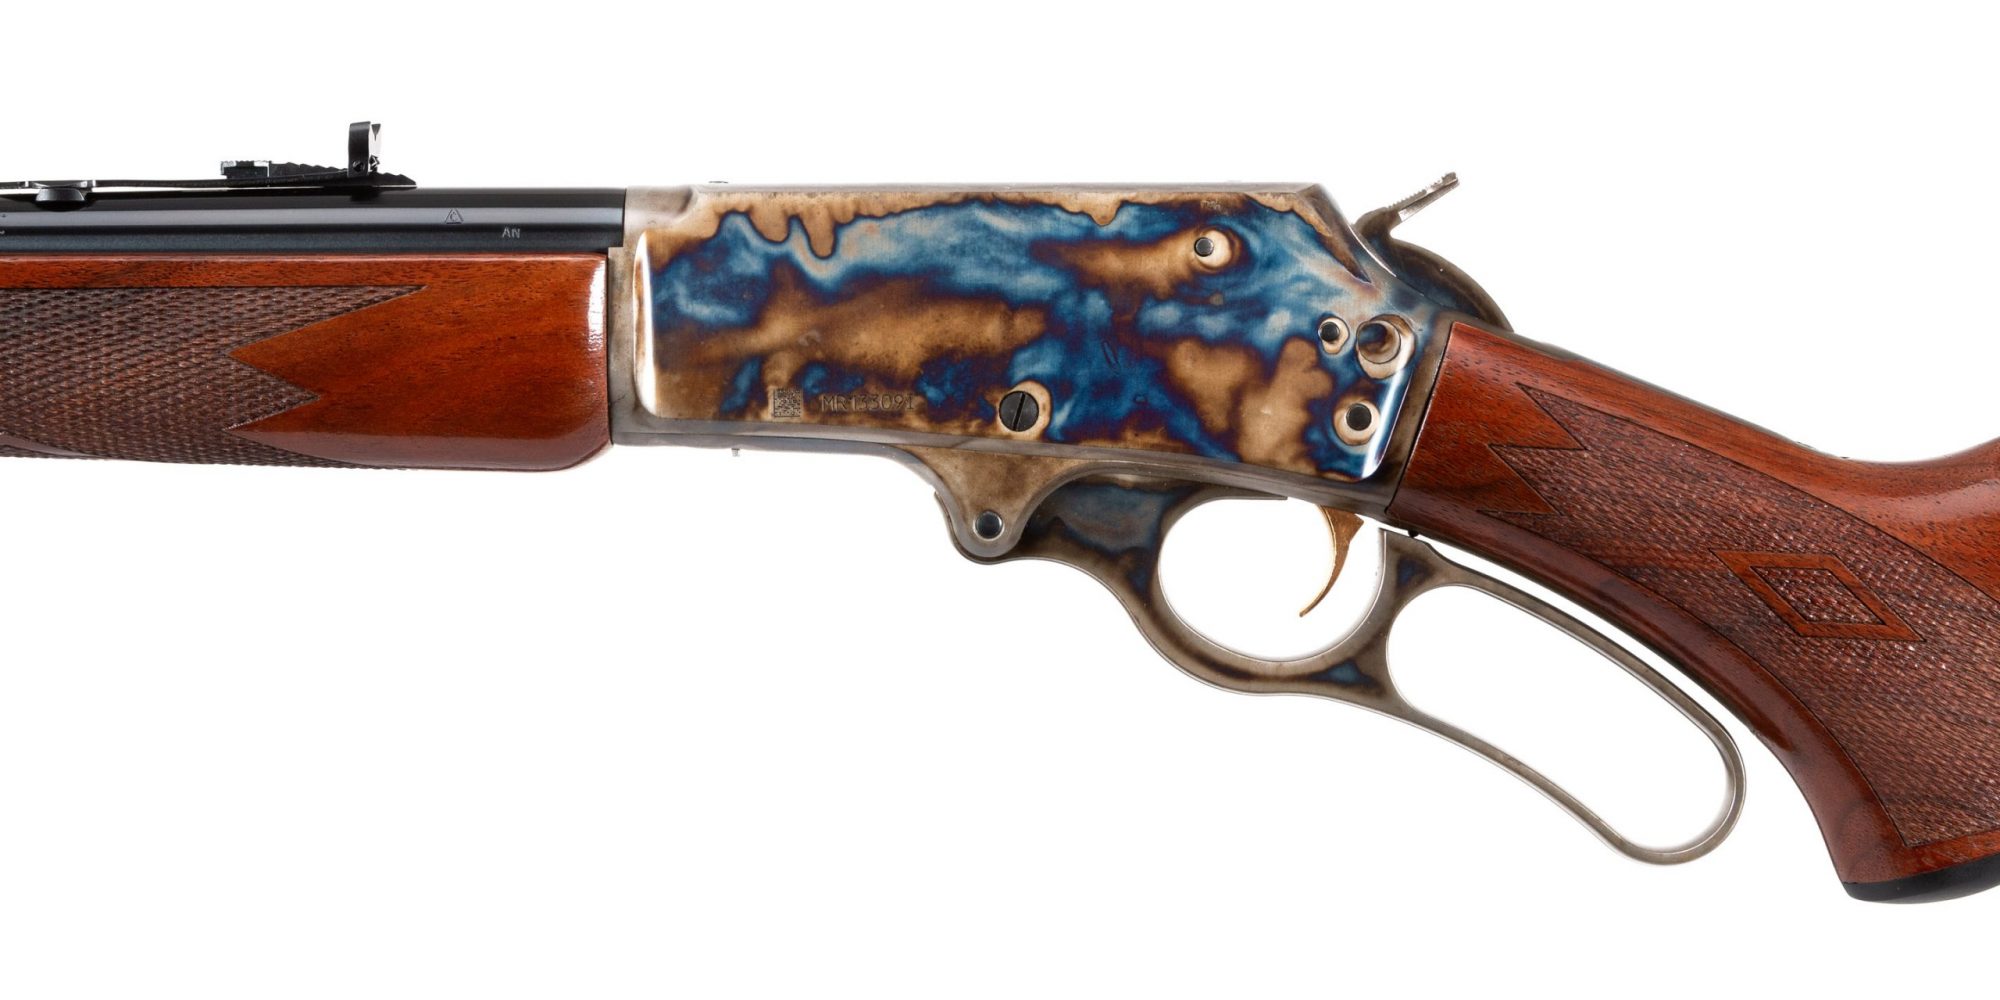 Photo of a Turnbull Finished Marlin 336C featuring bone charcoal color case hardening